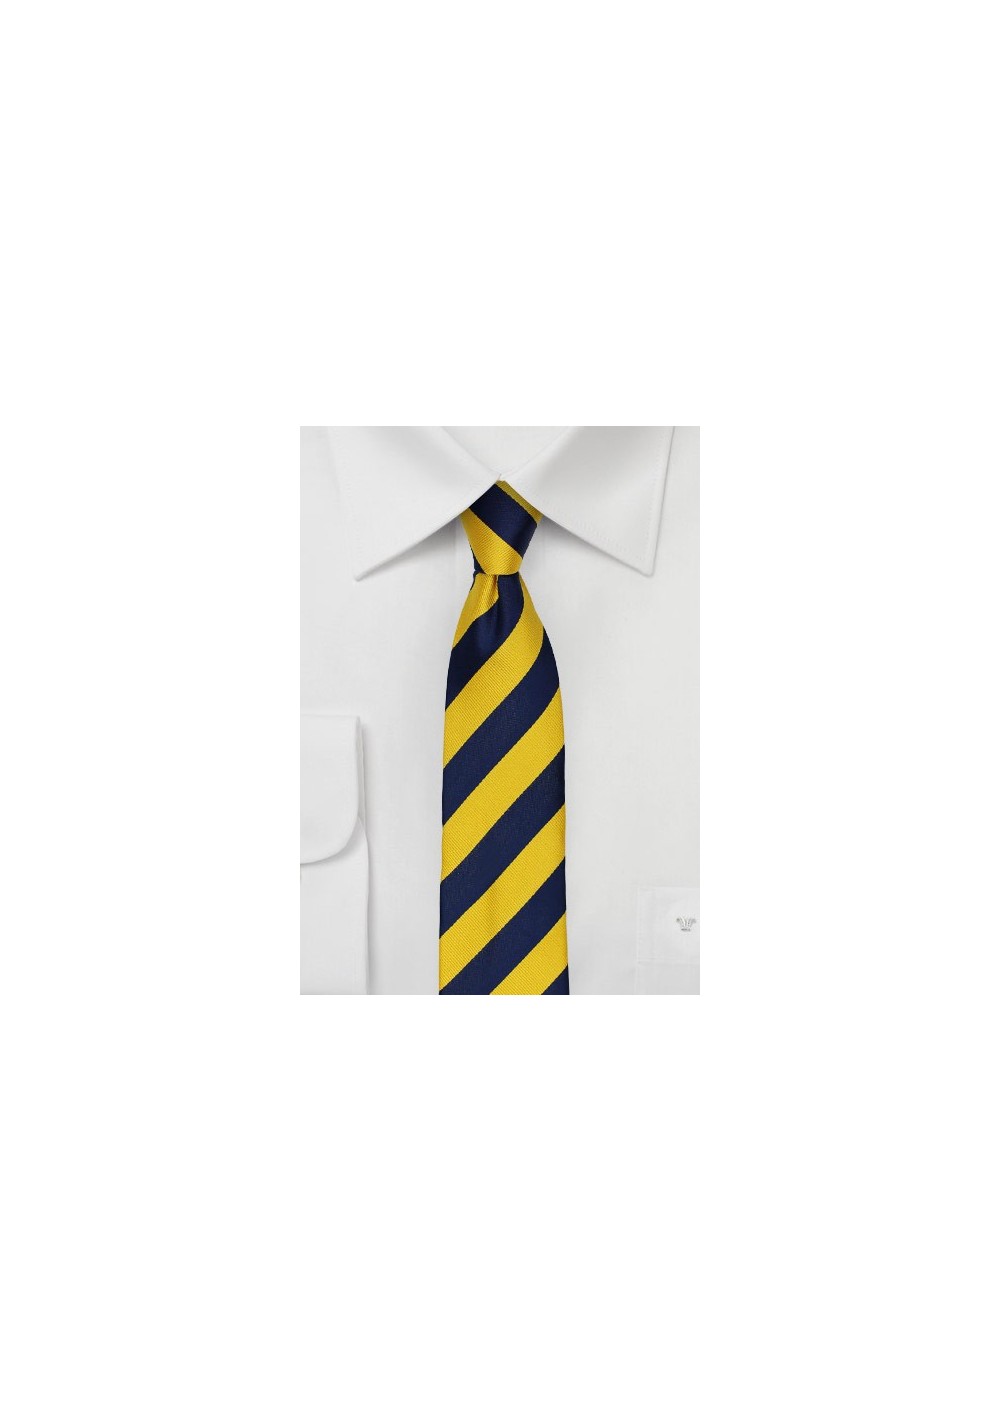 Skinny Striped Tie in Navy and Yellow